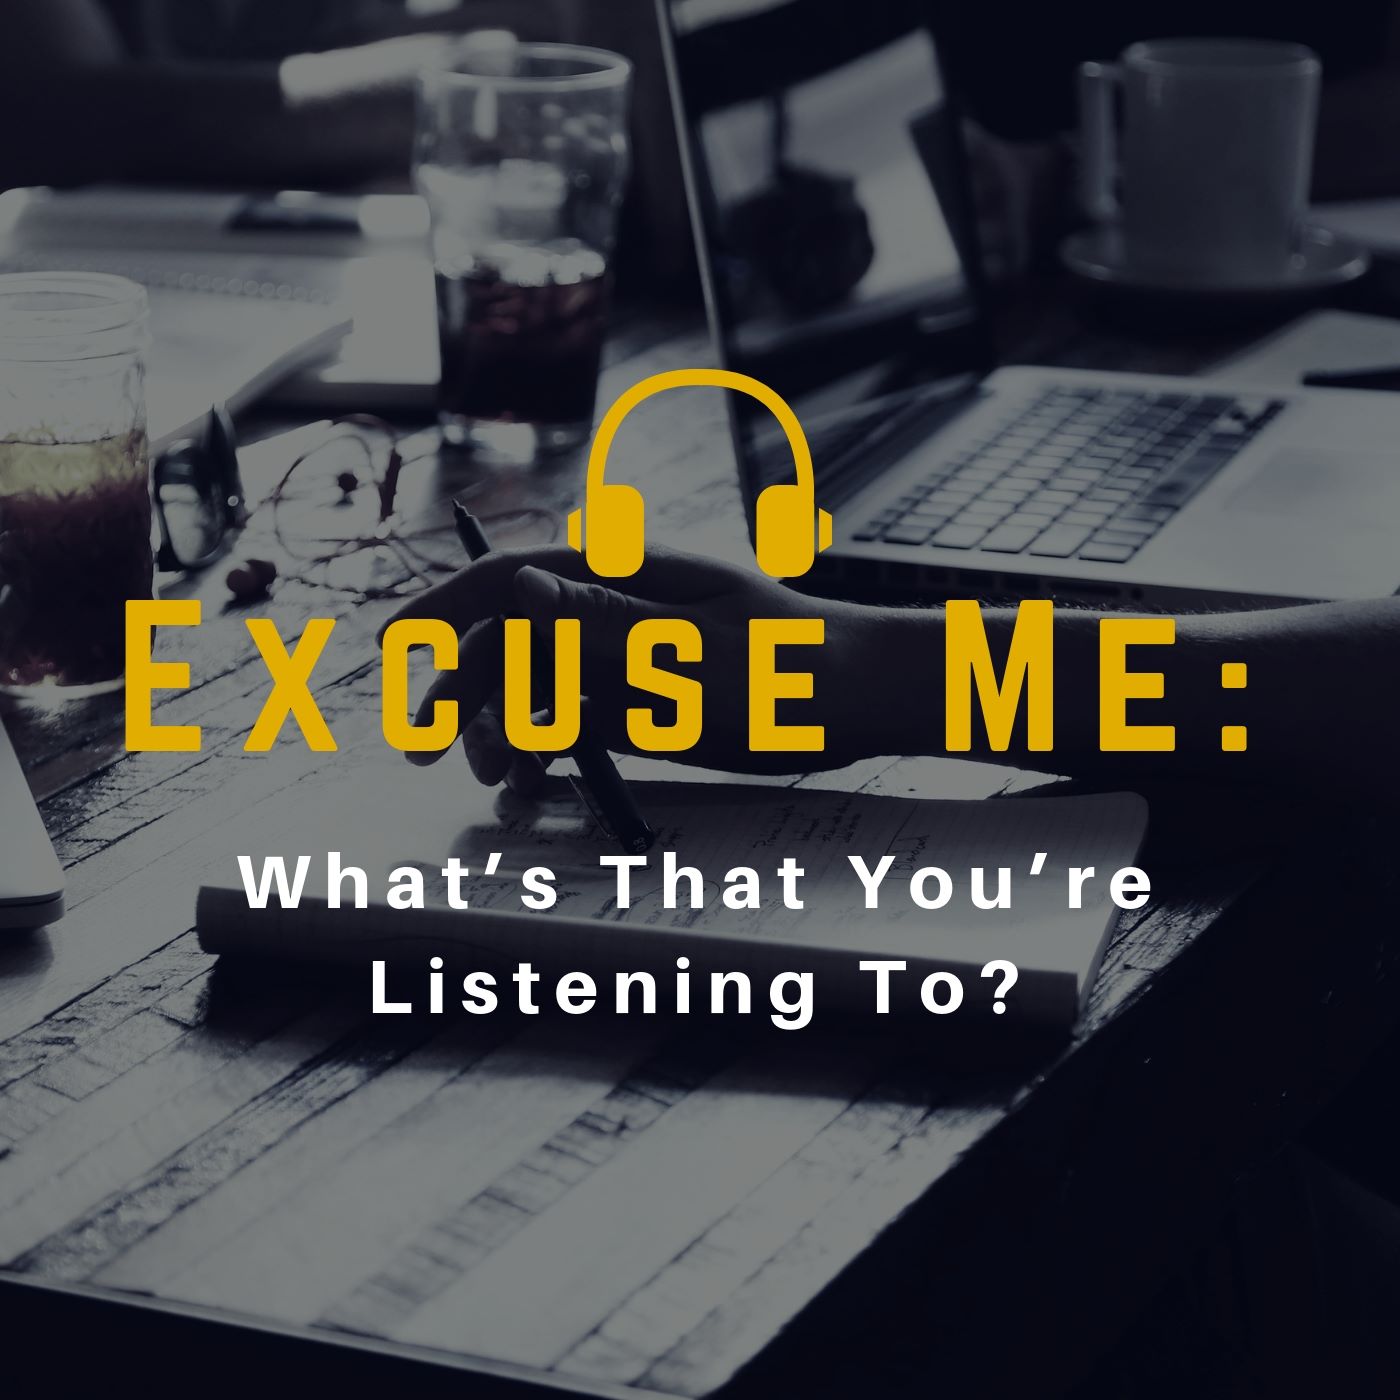 Excuse Me: What's that you are listening to?